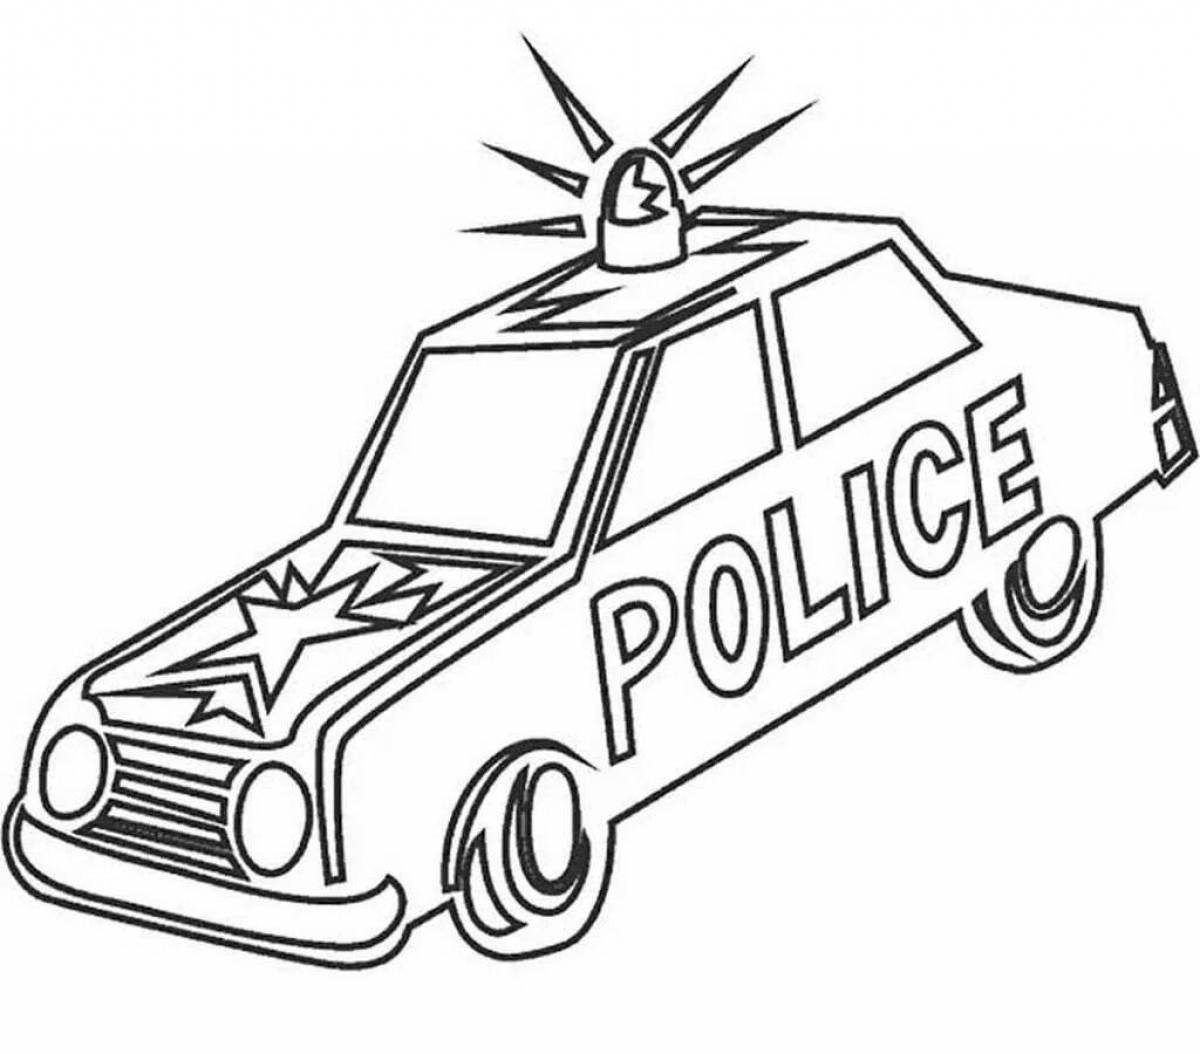 Incredible police car coloring book for kids